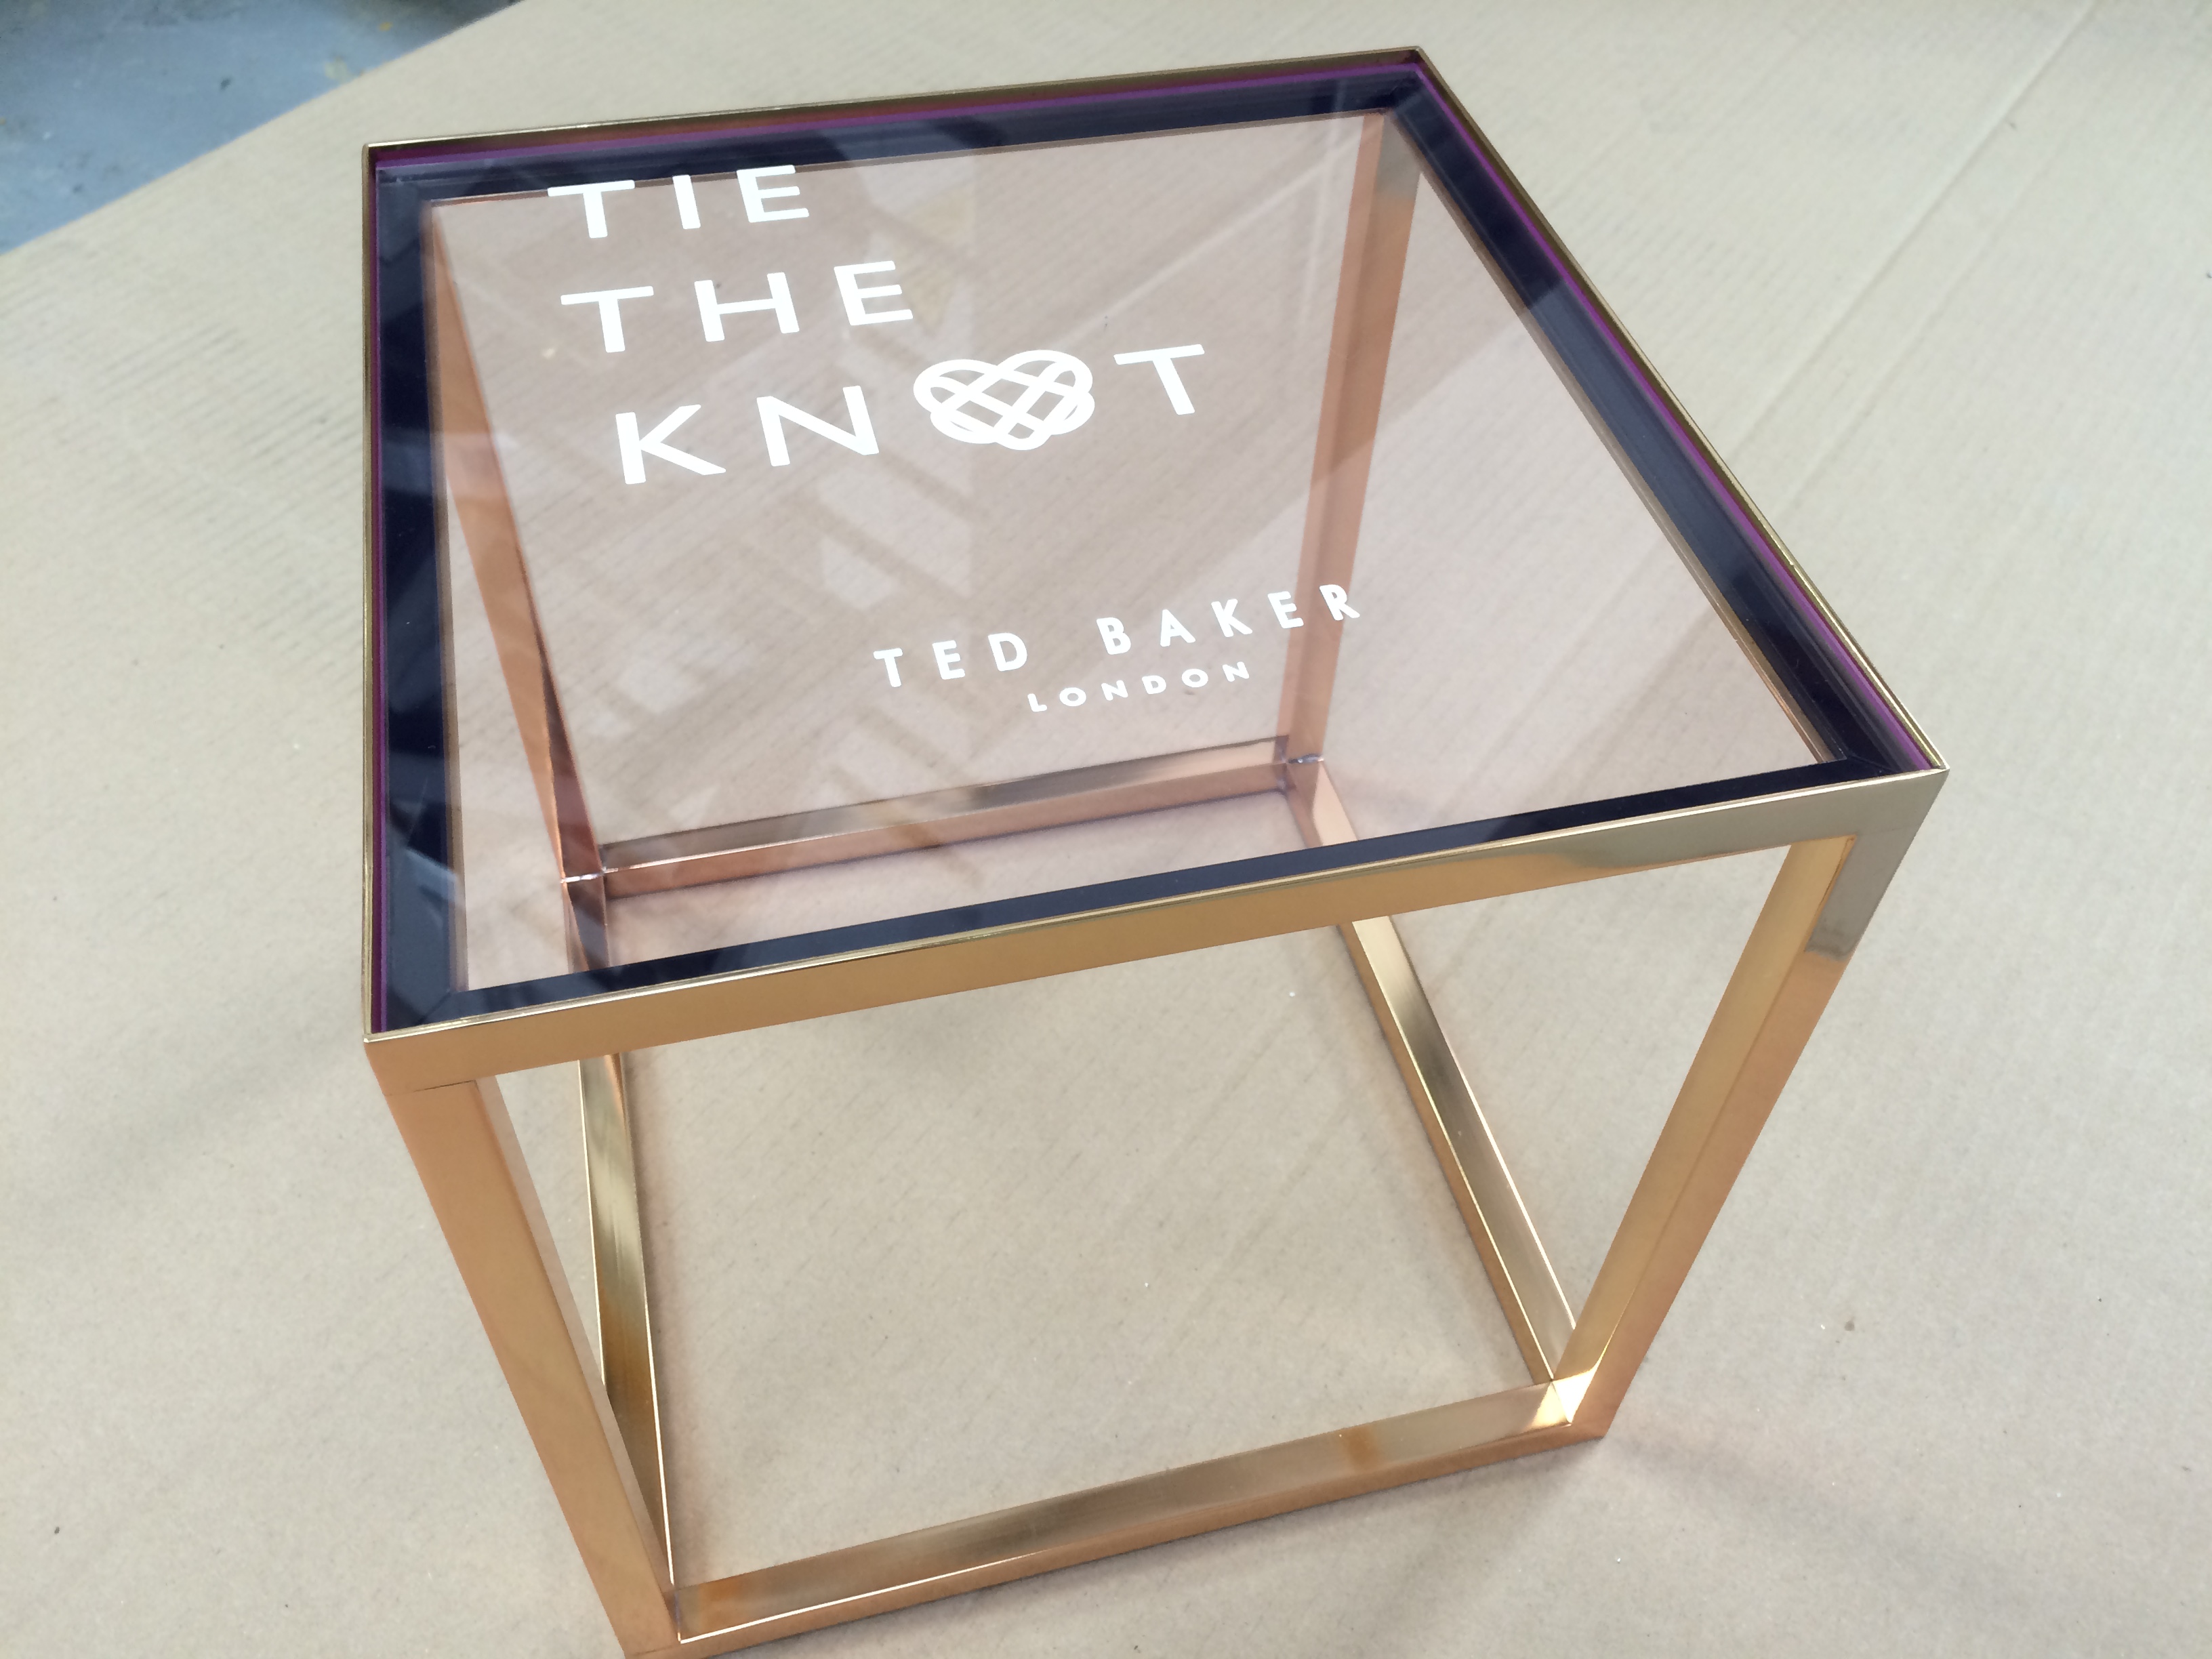 Ted Baker Tie The Knot Footwear Display. Welded steel stand, plated in gold finish with engraved and infilled Fluorescent pink edge clear acrylic.